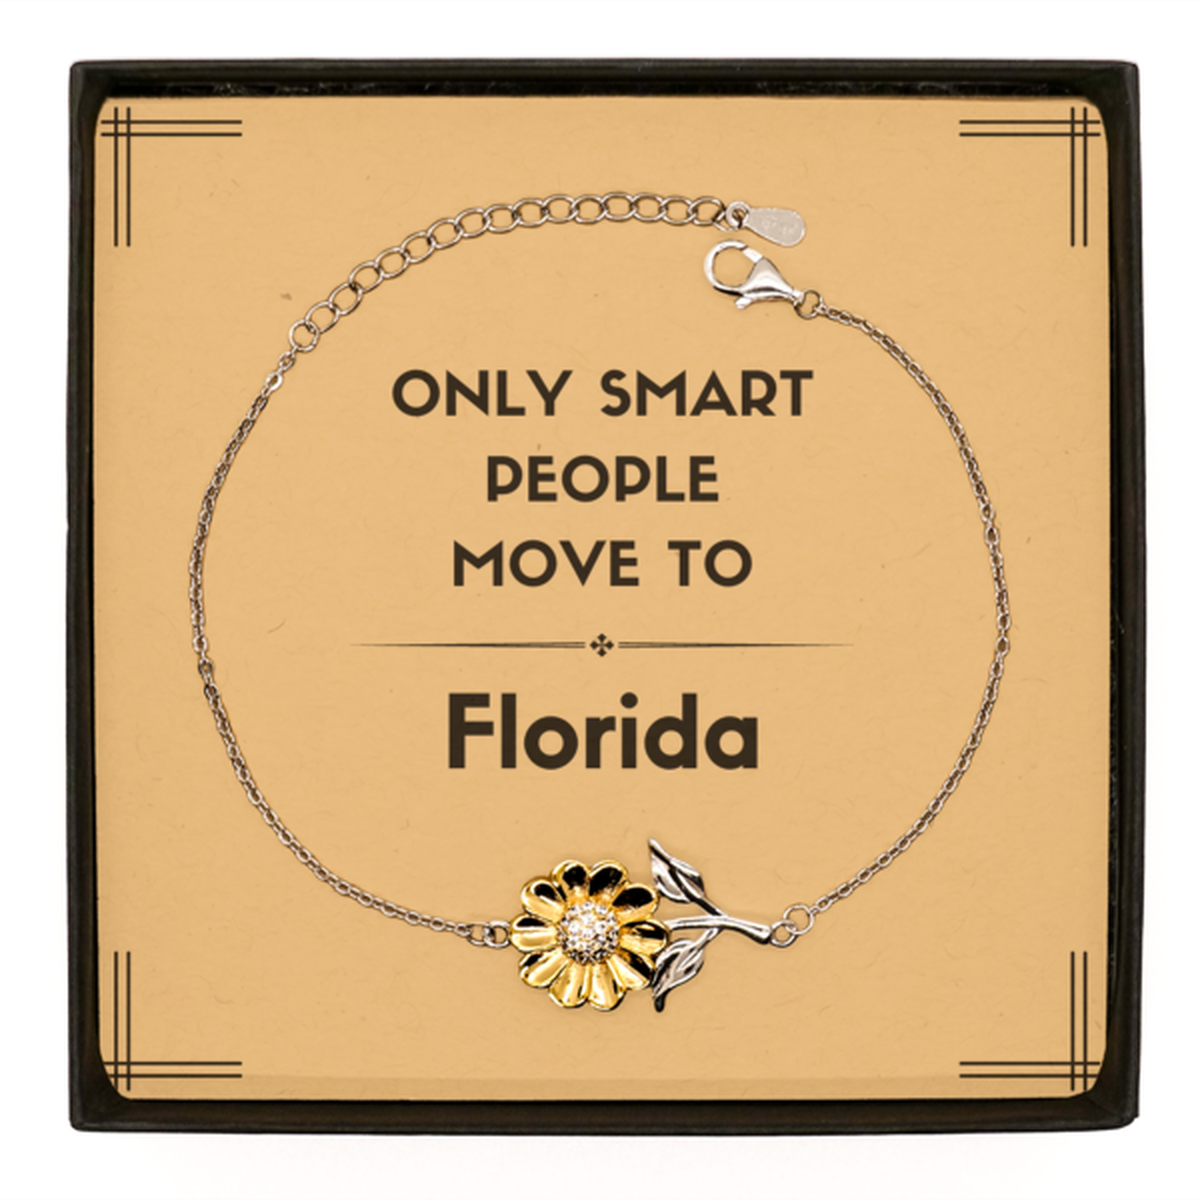 Only smart people move to Florida Sunflower Bracelet, Message Card Gifts For Florida, Move to Florida Gifts for Friends Coworker Funny Saying Quote